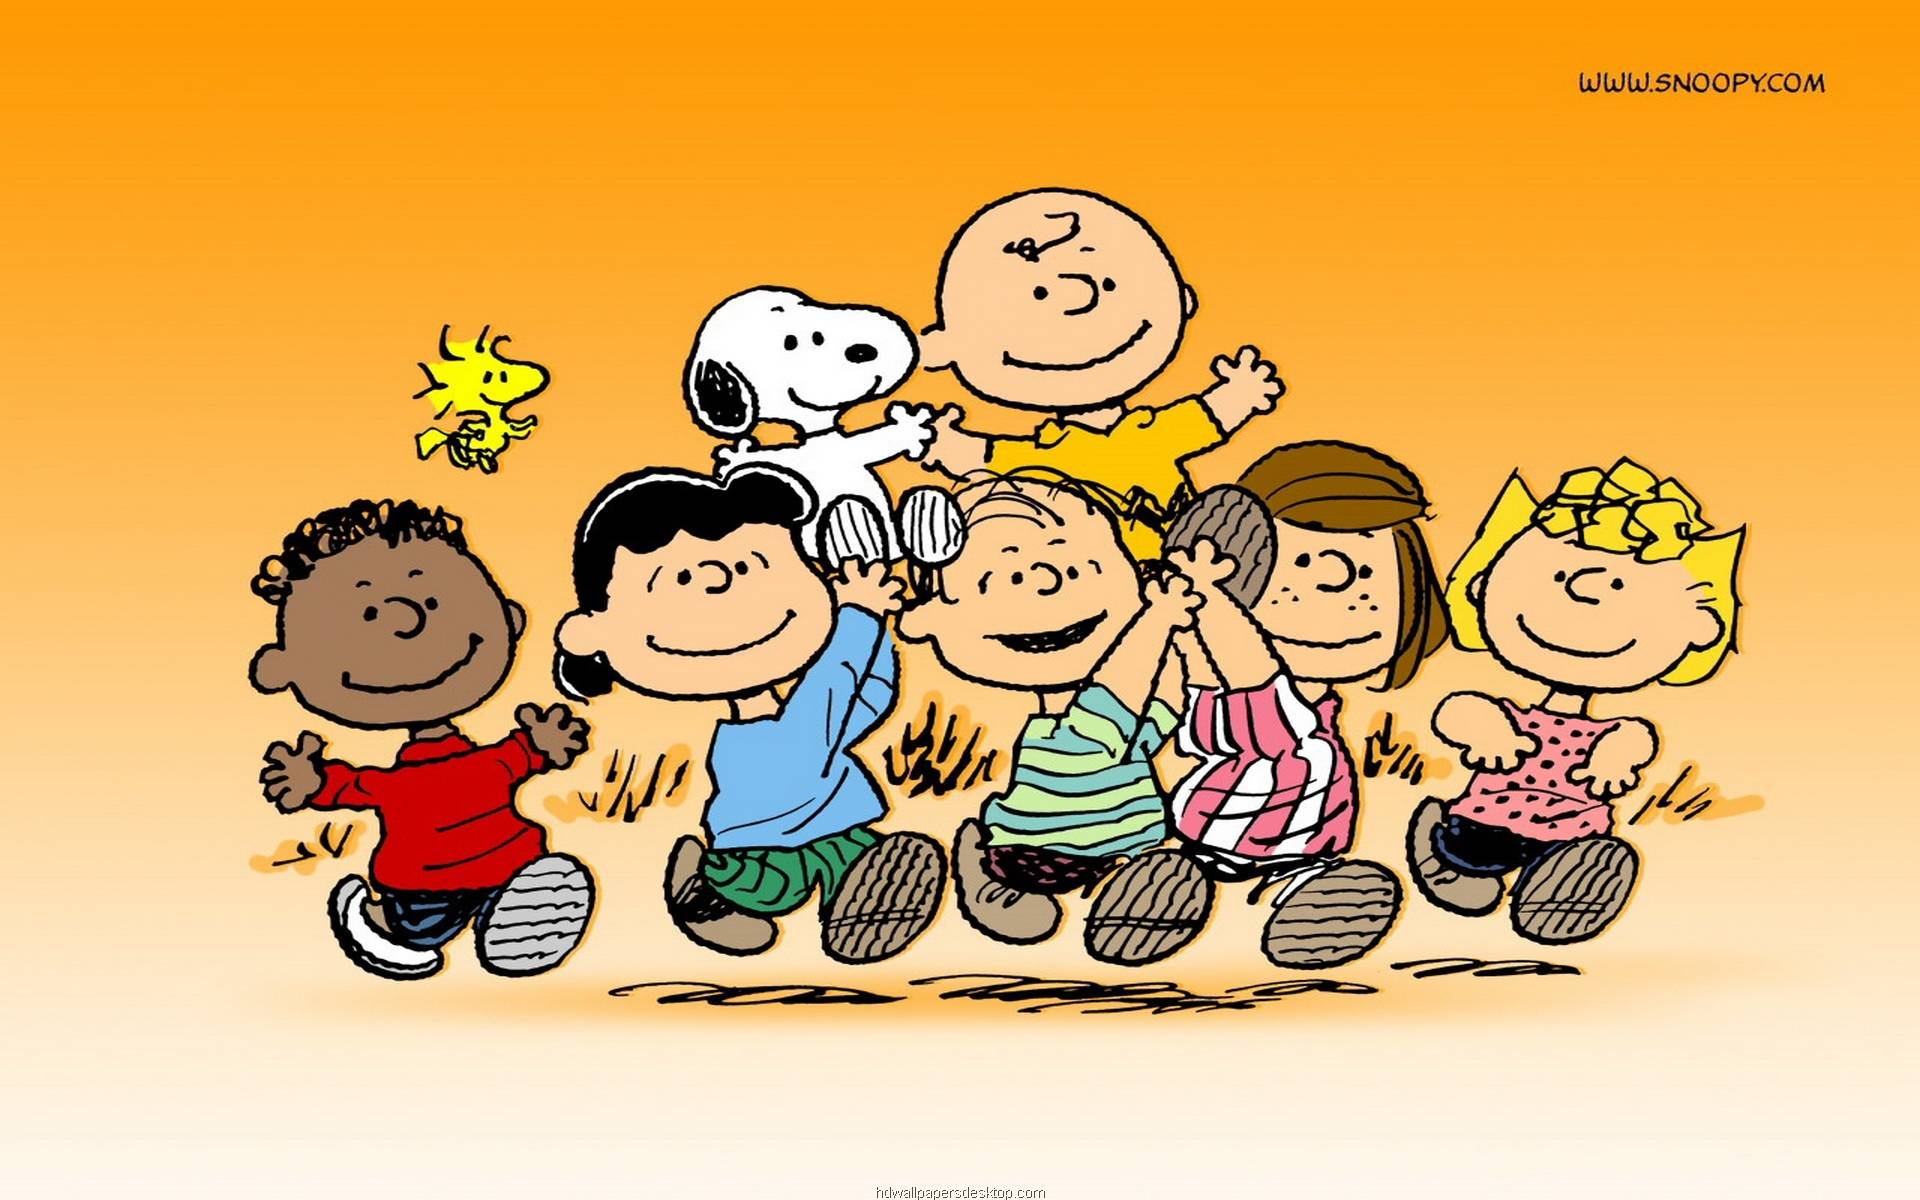 Free download Snoopy The gang from Snoopy [1920x1200] for your Desktop, Mobile & Tablet. Explore Peanuts Characters Wallpaper. Free Peanuts Desktop Wallpaper, Peanuts Gang Fall Wallpaper, Peanuts Holiday Wallpaper